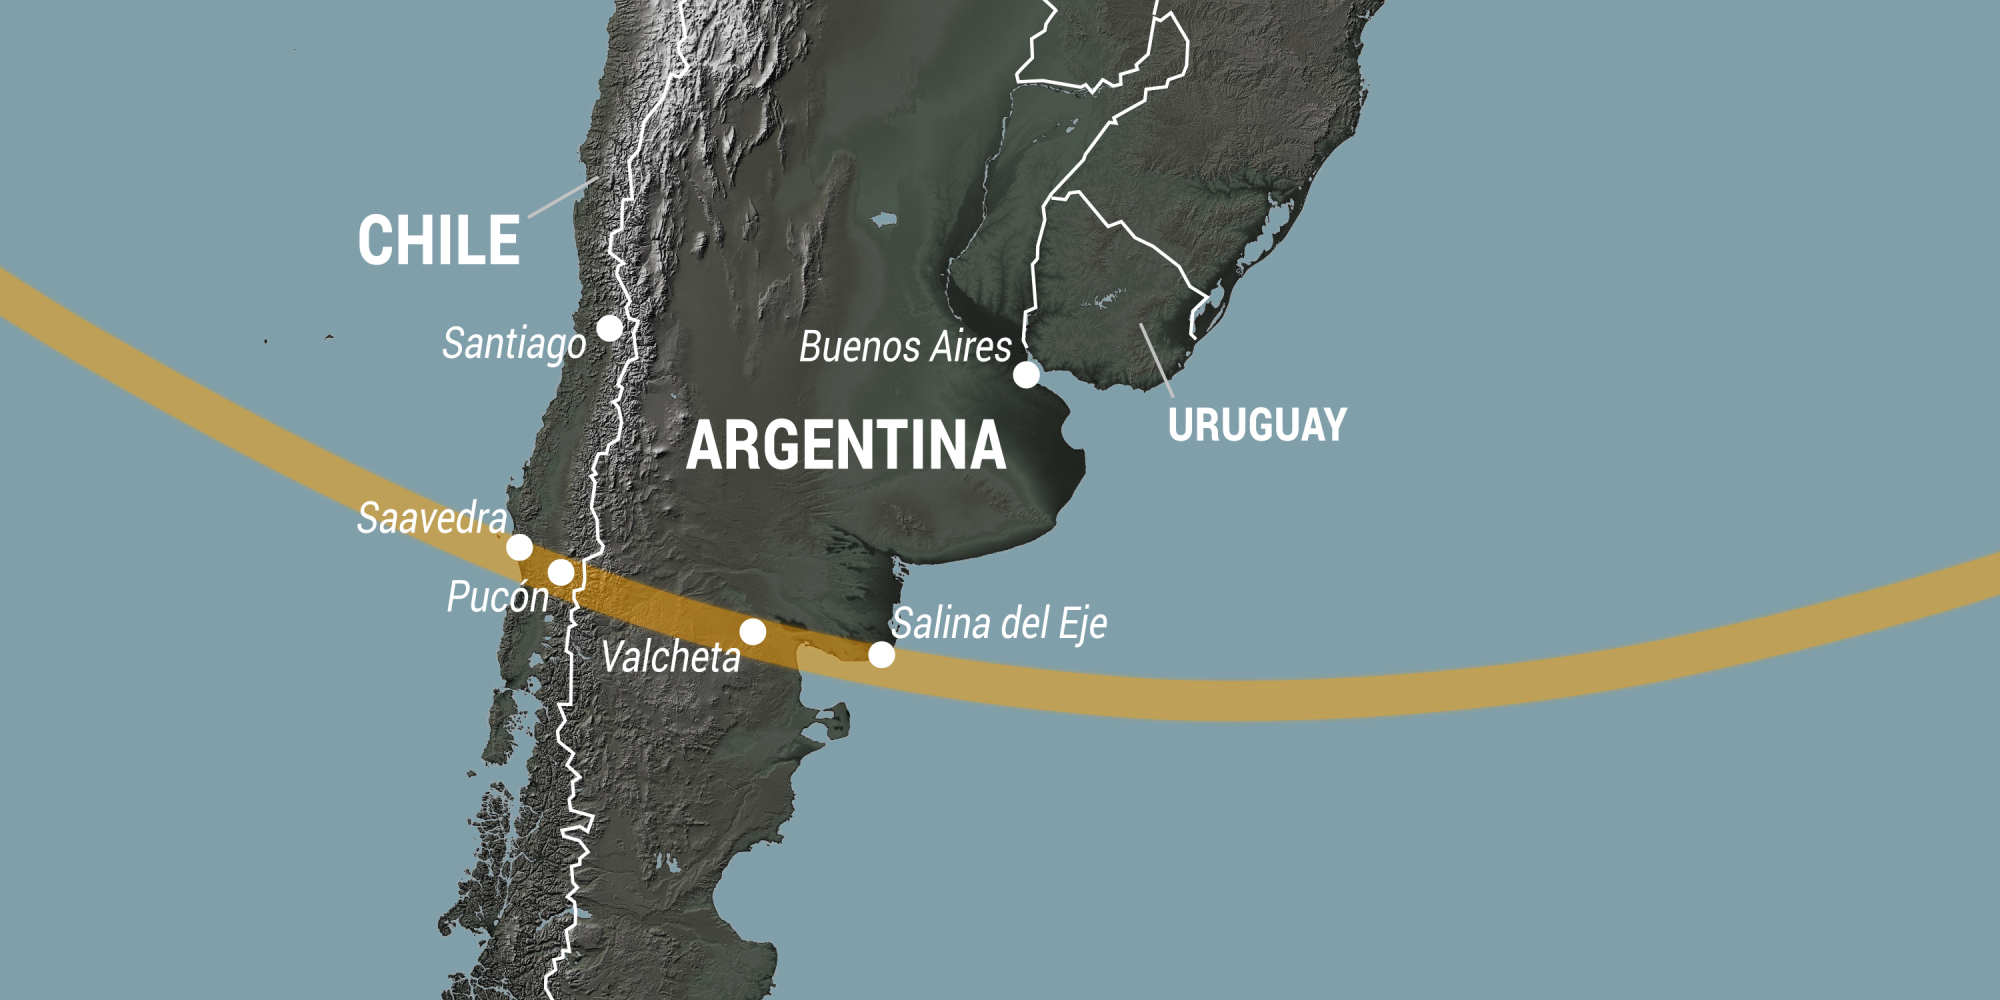 Map of the path of totality of the Dec. 14, 2020 solar eclipse in Argentina and Chile.